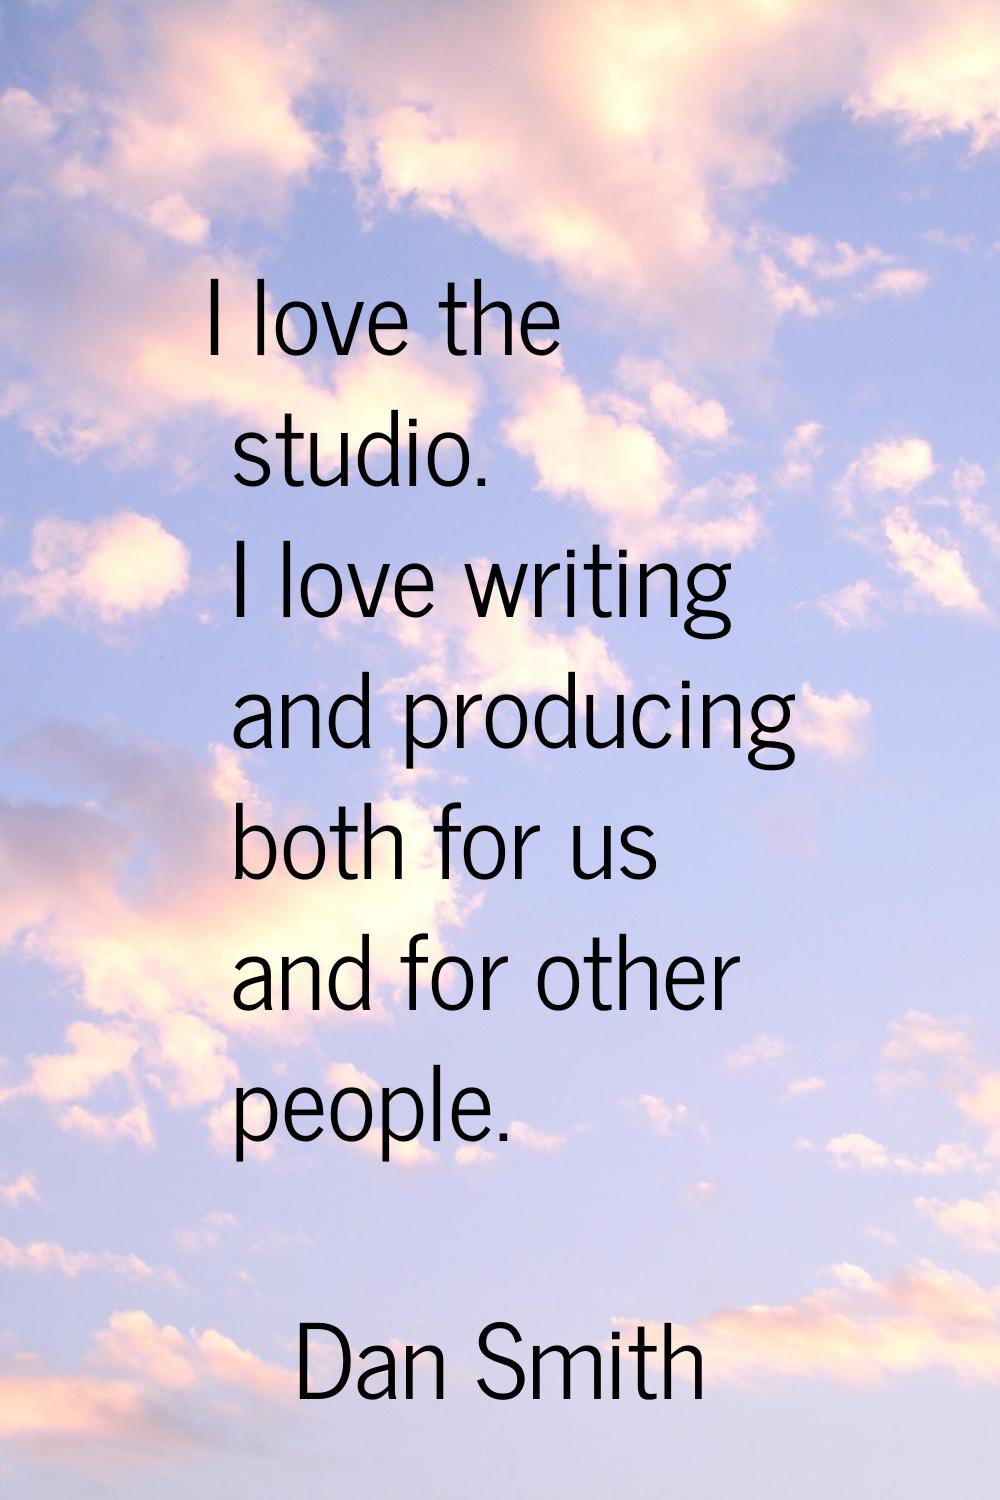 I love the studio. I love writing and producing both for us and for other people.